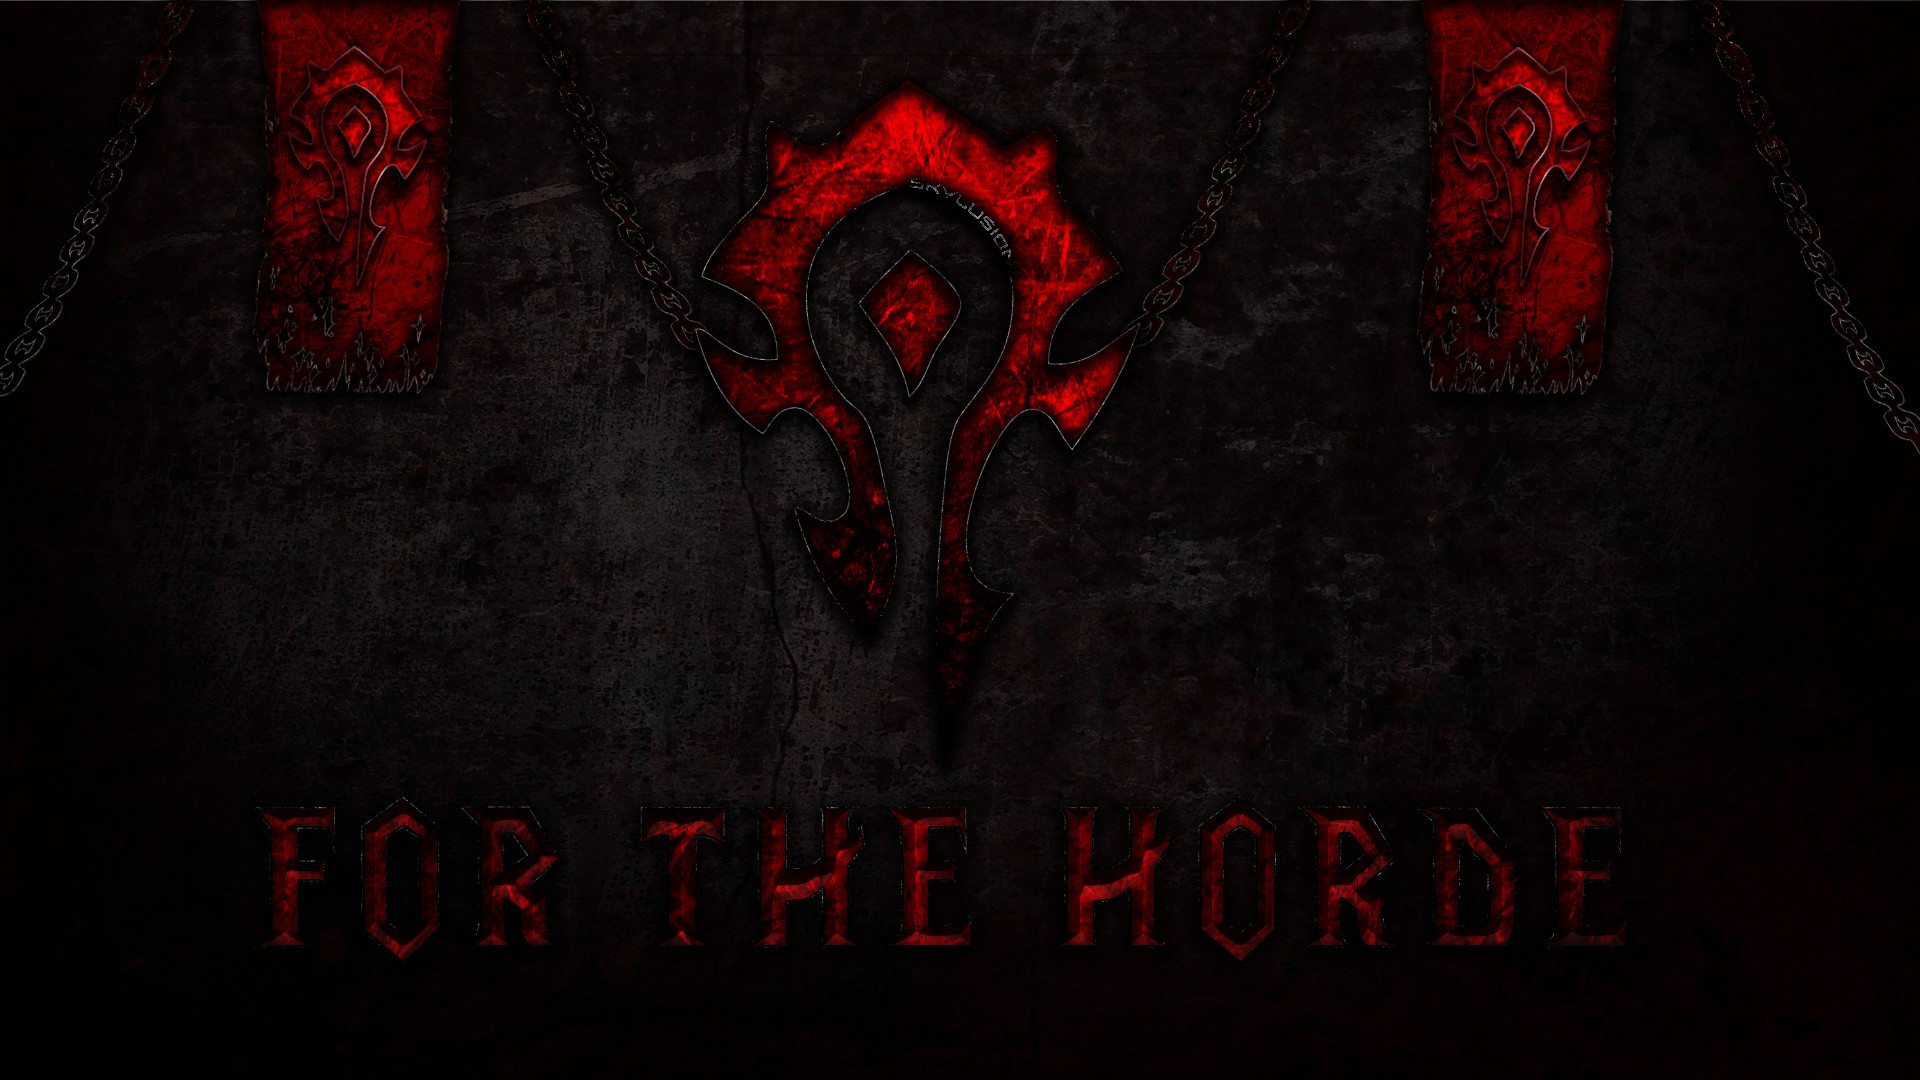 1920x1080 For the Horde Wallpaper by NioJay on DeviantArt